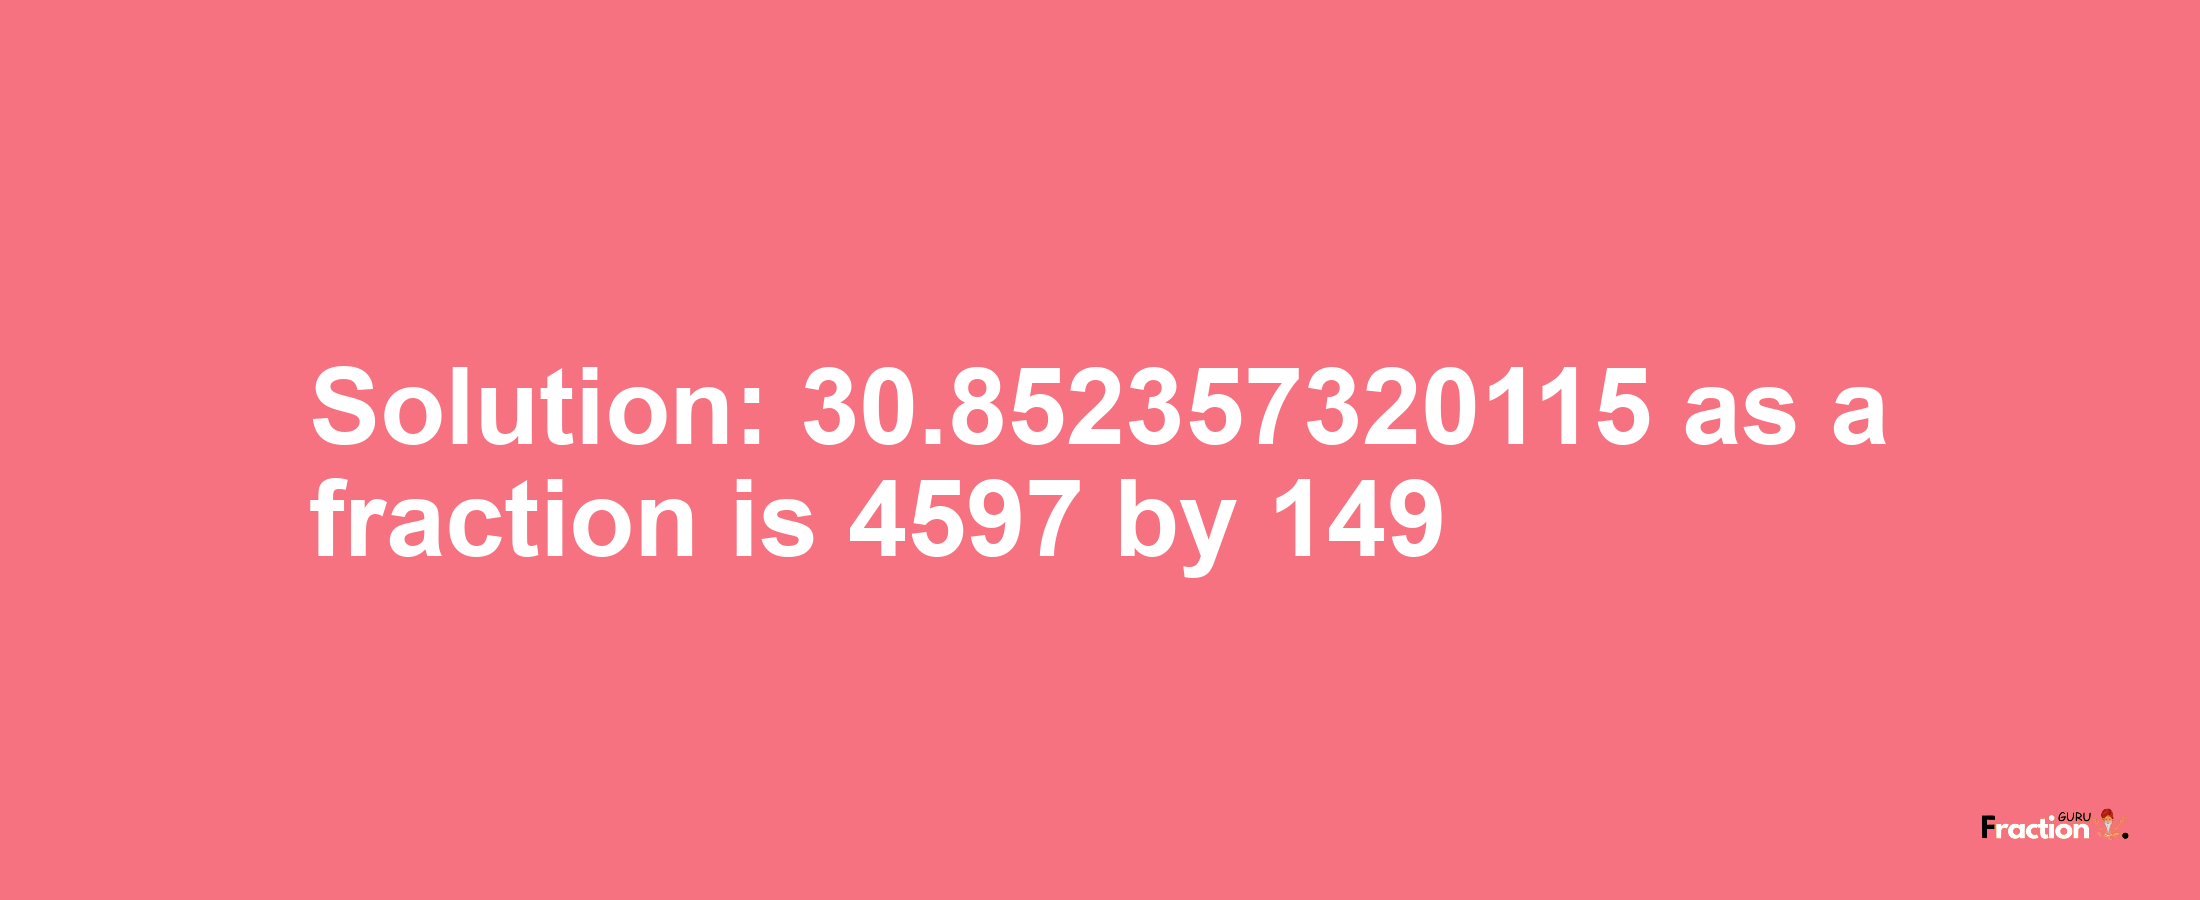 Solution:30.852357320115 as a fraction is 4597/149